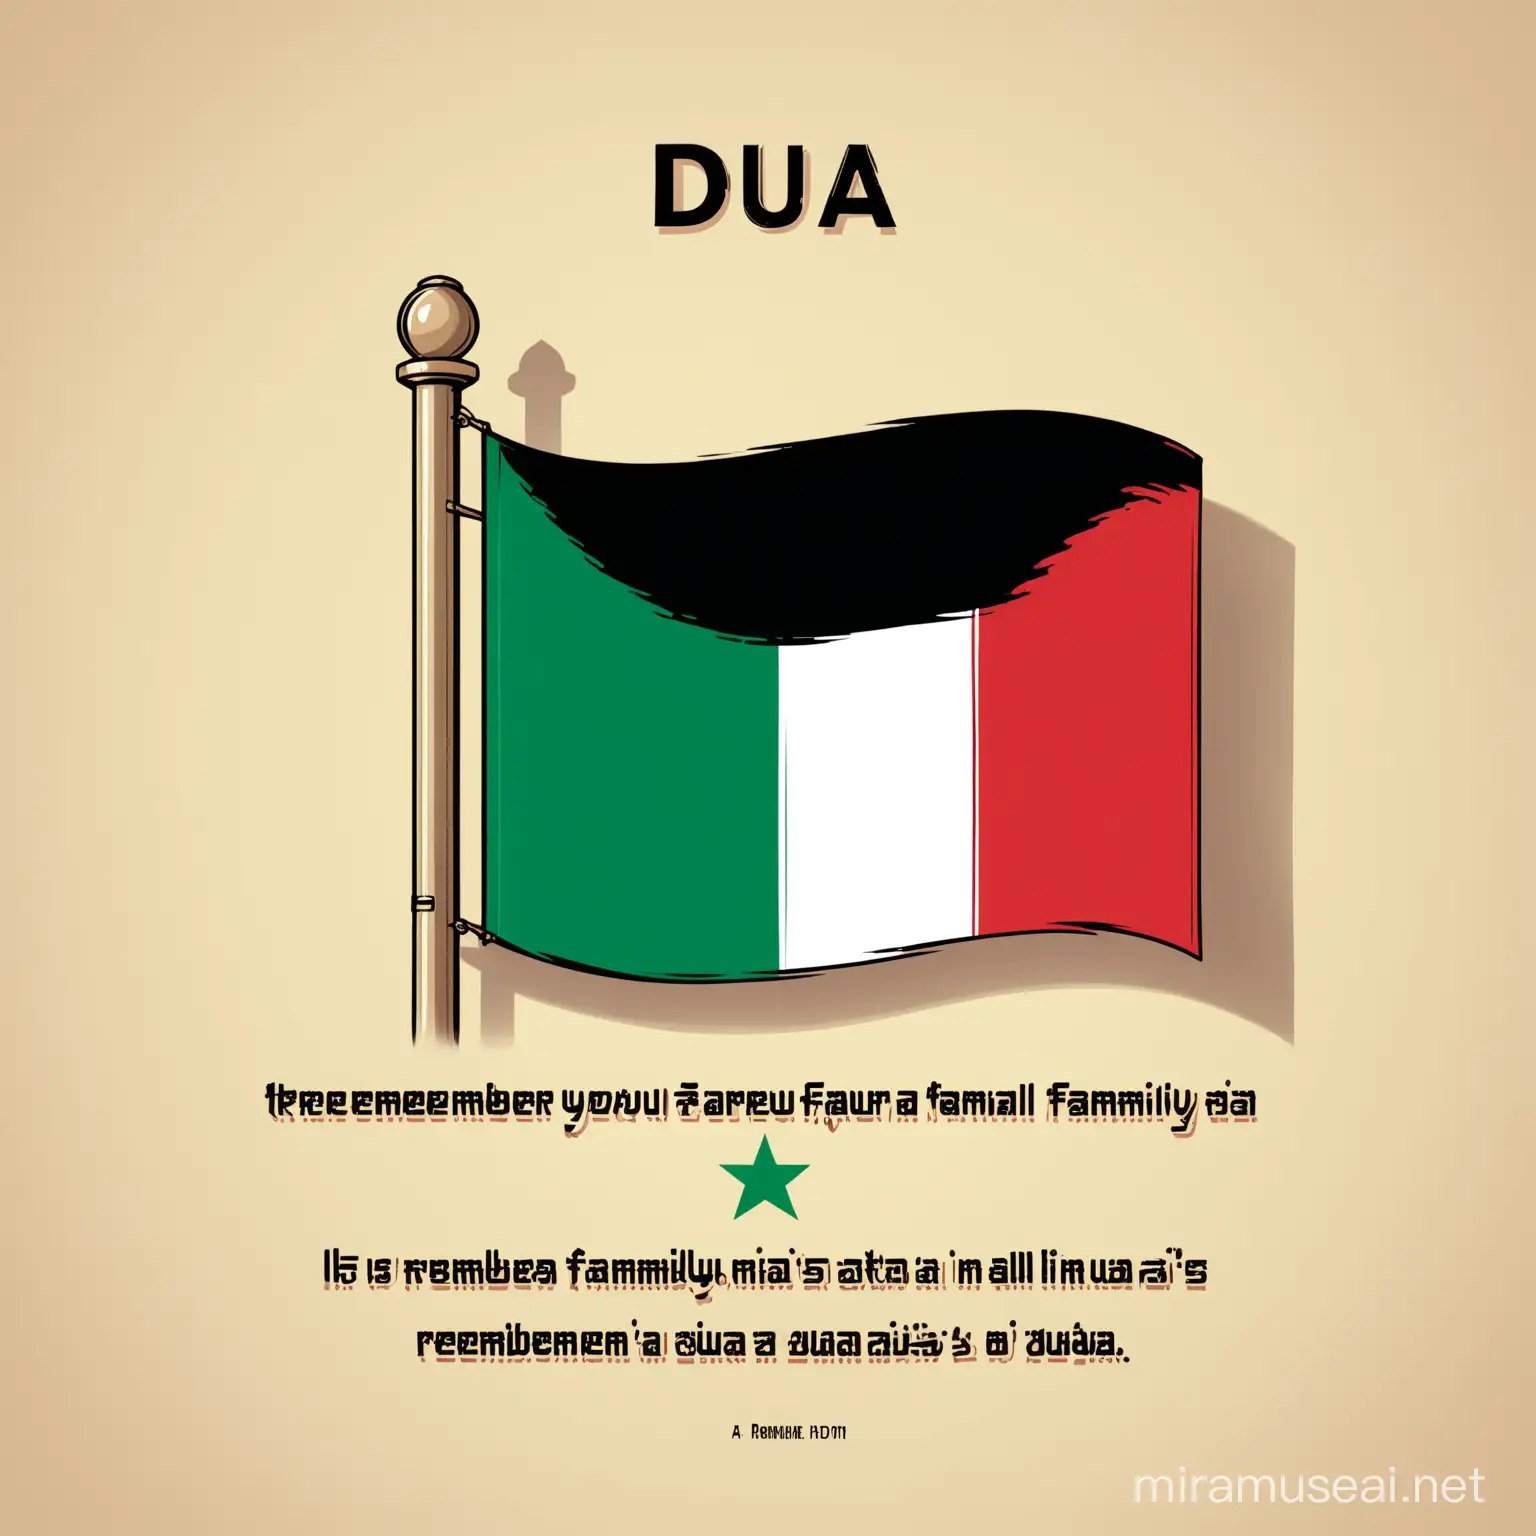 Palestinian Flag Design with Remember Your Eternal Family in DUAs Text